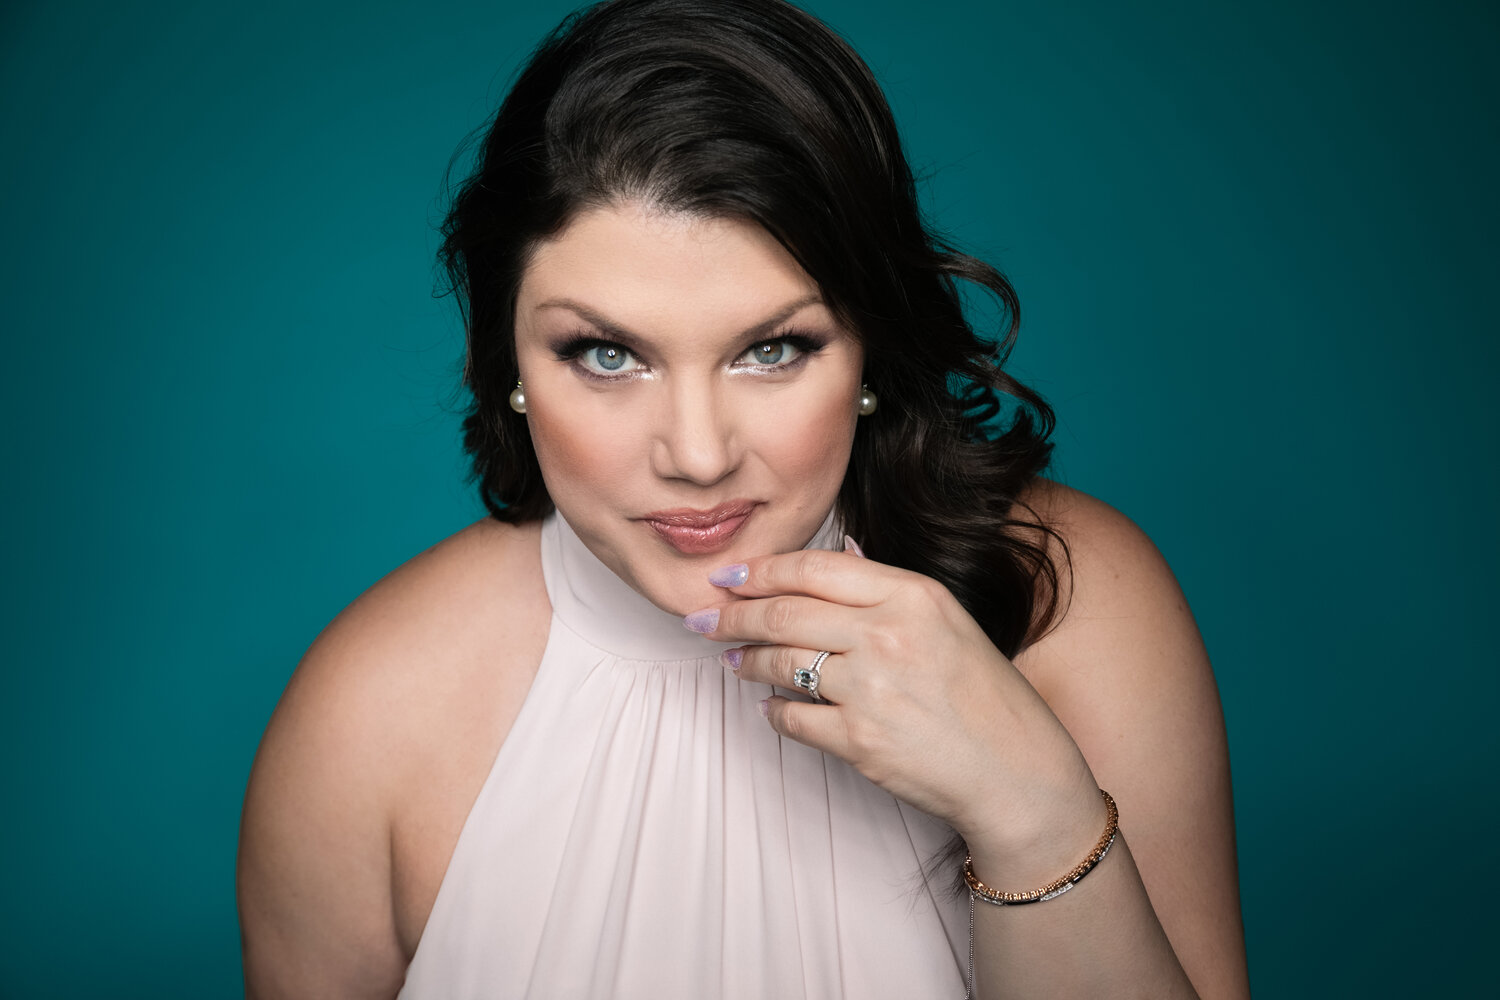 Jazz singer Jane Monheit, who grew up in Oakdale, performs her holiday show “Home for the Holidays,” at Staller Center for the Arts at Stony Brook University on Dec. 9.